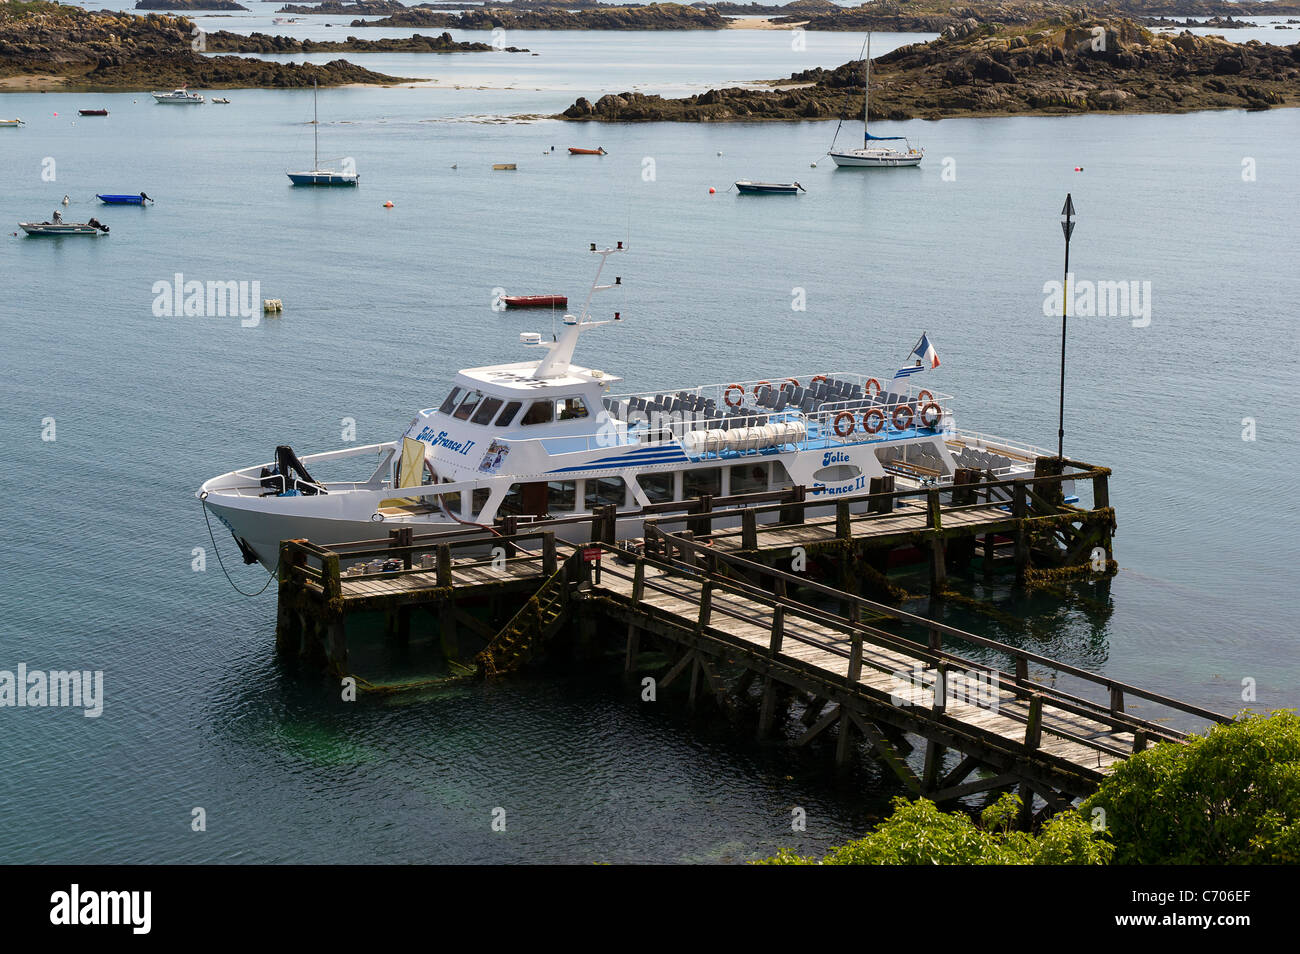 Tourist boat Jolie France II moored alongside jetty at high tide on Grande Ile in the Iles Chausey. Stock Photo